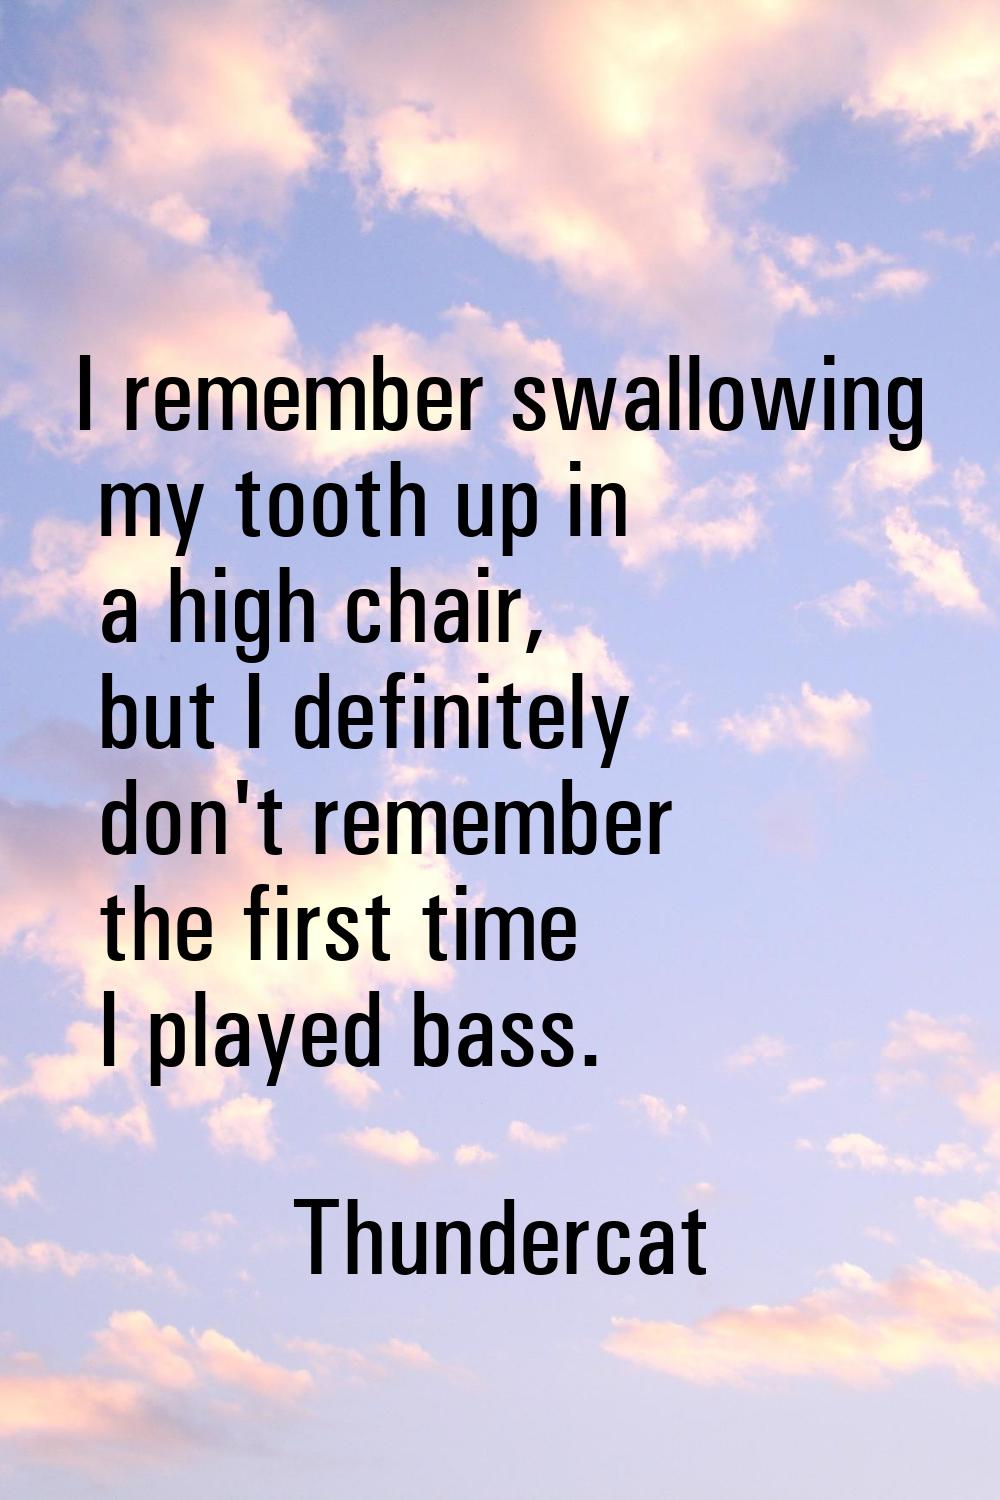 I remember swallowing my tooth up in a high chair, but I definitely don't remember the first time I